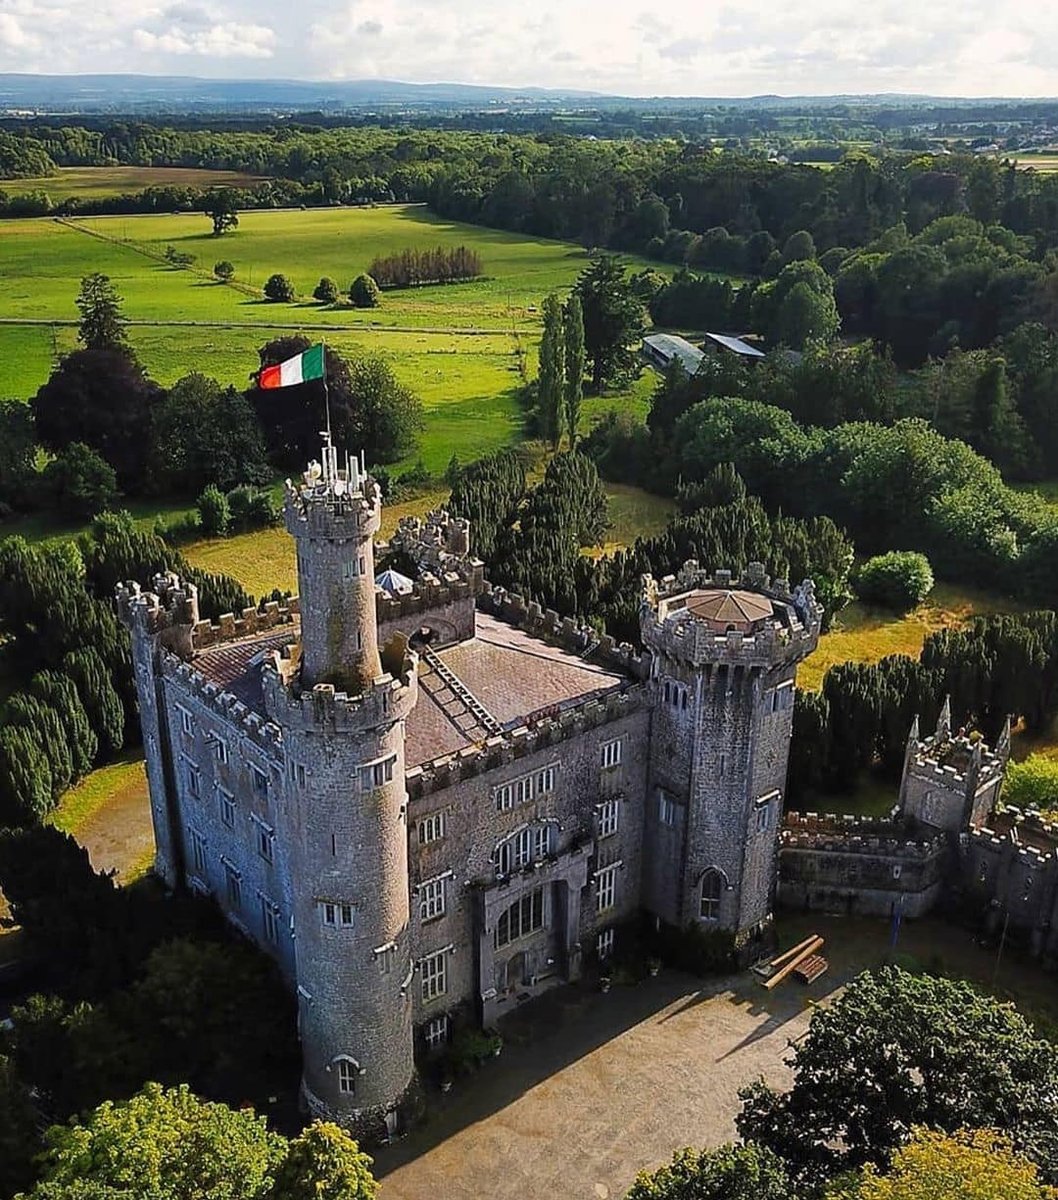 You’ll find Charleville Castle just outside Tullamore in Offaly. The castle was built in the 1600s and it’s incredibly well preserved. 📸 by: @dronethium Is Charleville Castle worth visiting? lovetovisitireland.com/is-charleville… #loveireland #visitireland #ireland